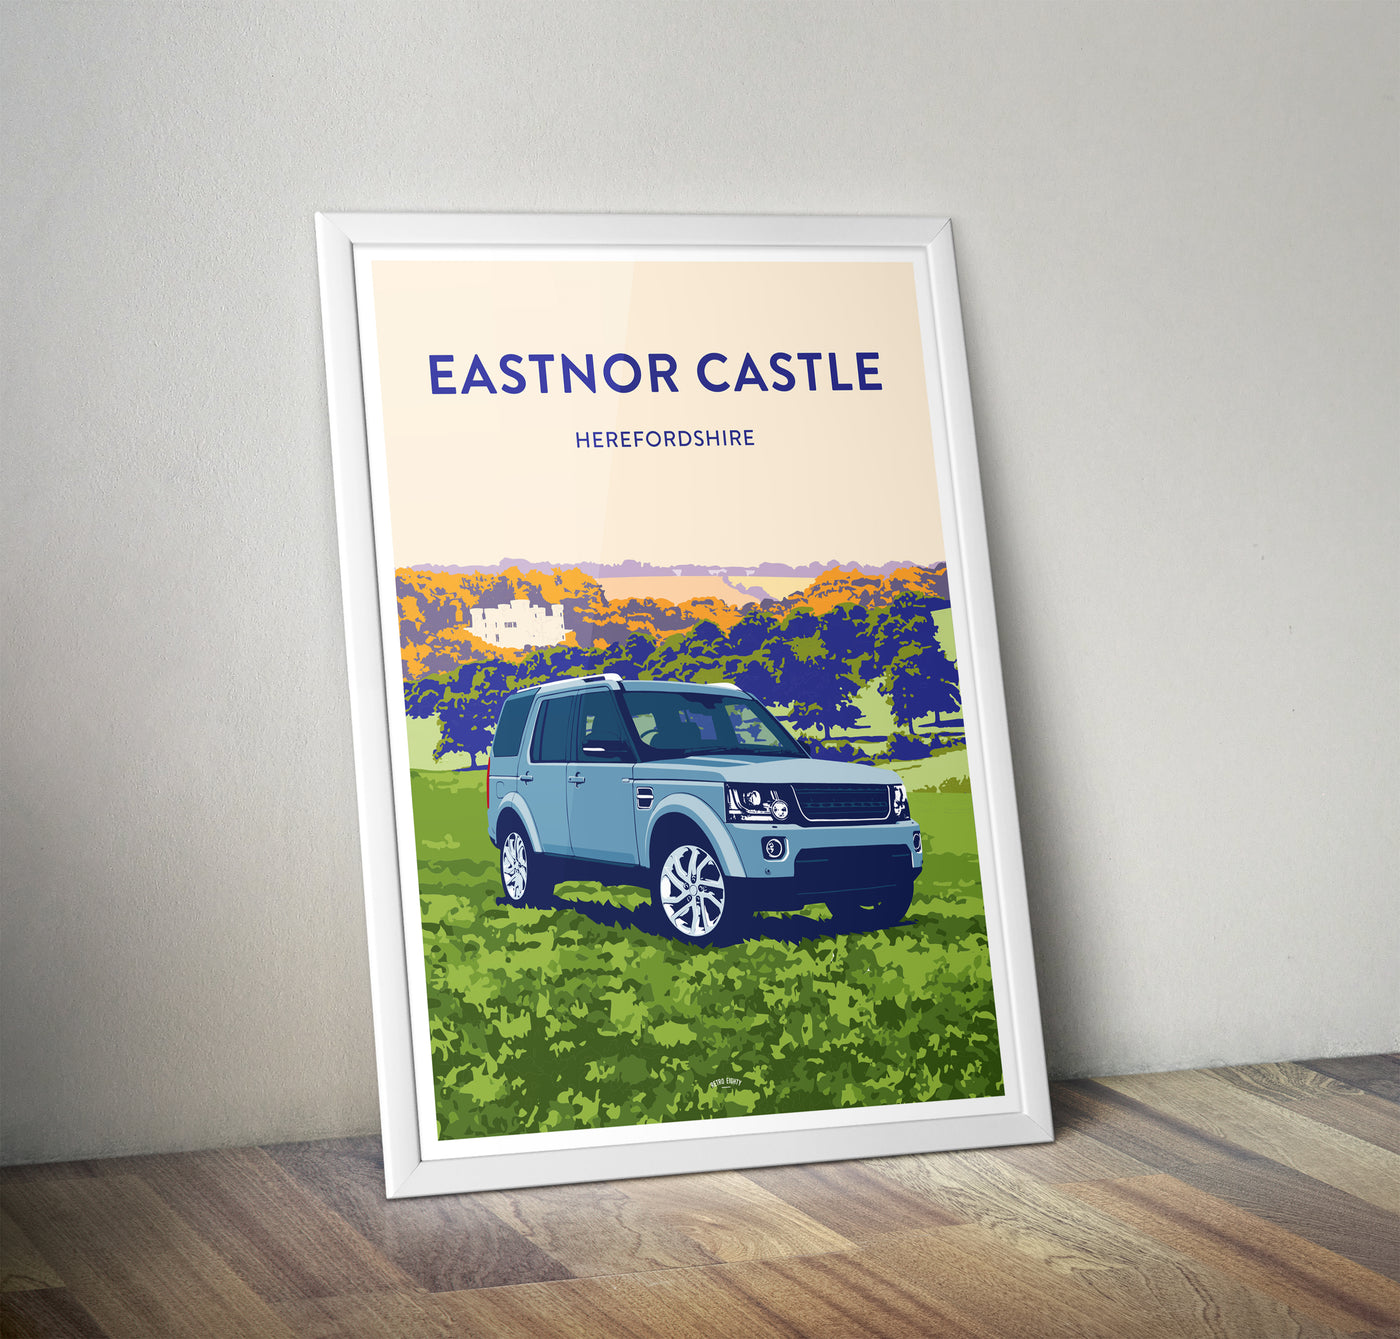 'Eastnor Castle' Discovery 4 Prints